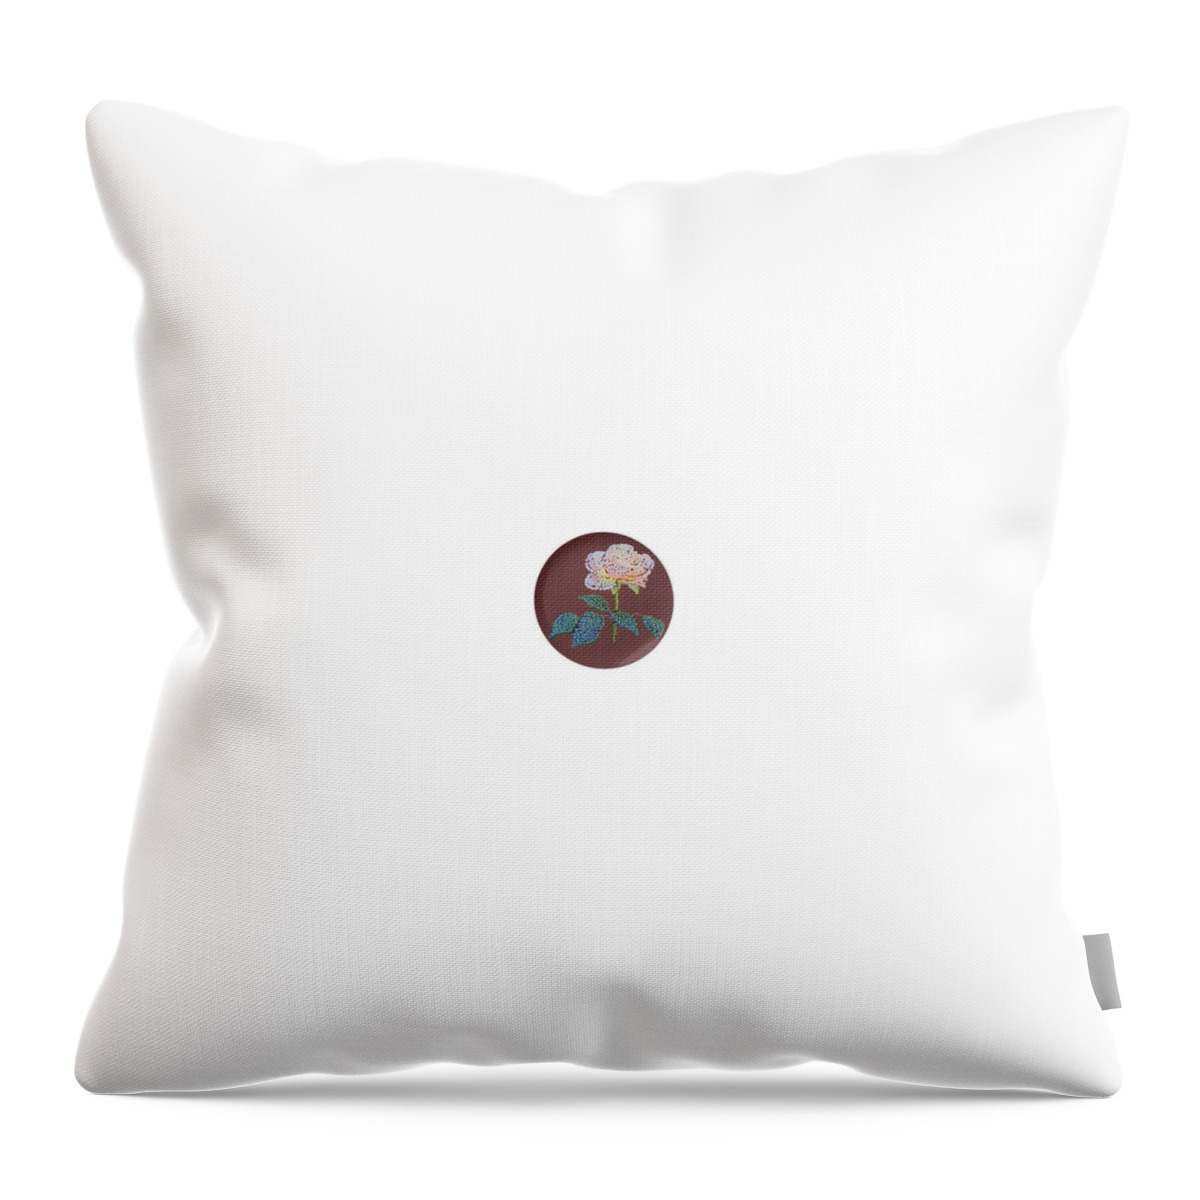  Throw Pillow featuring the digital art Bedazzed Rose Plate by R Allen Swezey